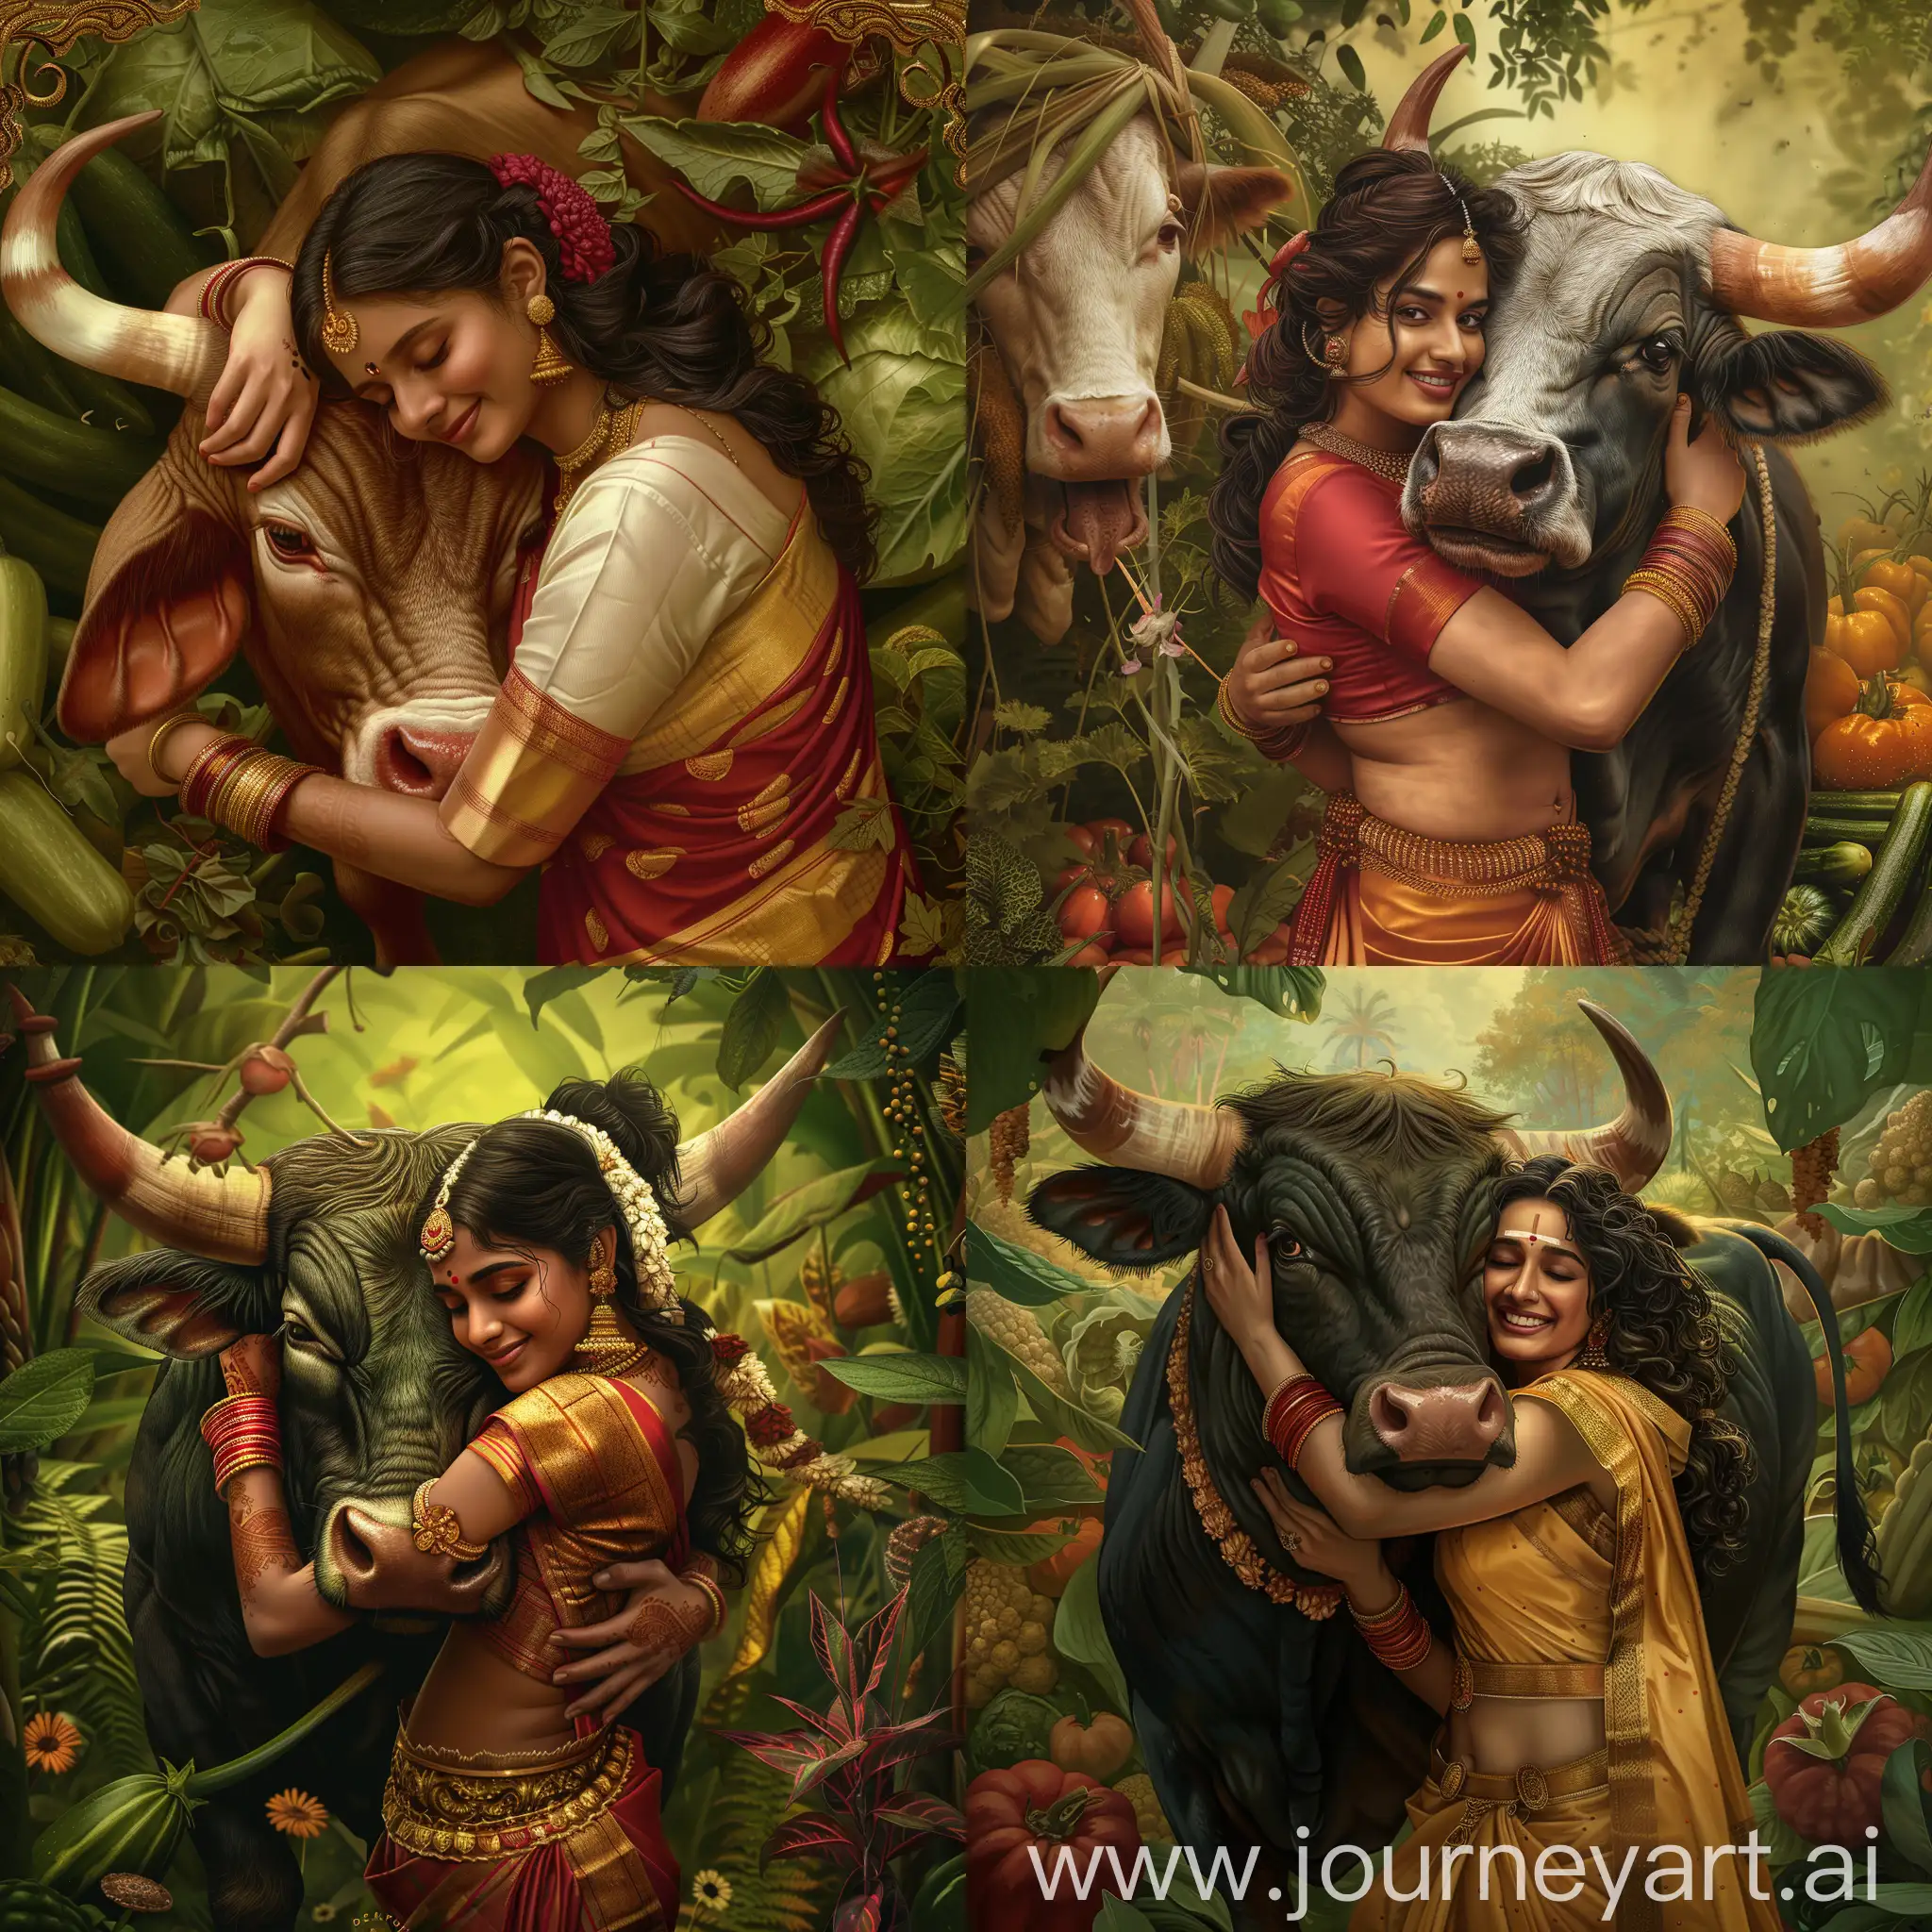 a stunning visual of a theme "a very beautiful Kerala Malayali woman hugging an Indian bull", bosomy, picturesque, intricately detailed, photorrealistic selfie scene, A very well crafted, detailed, subtle smooth color tone, vegetable world background